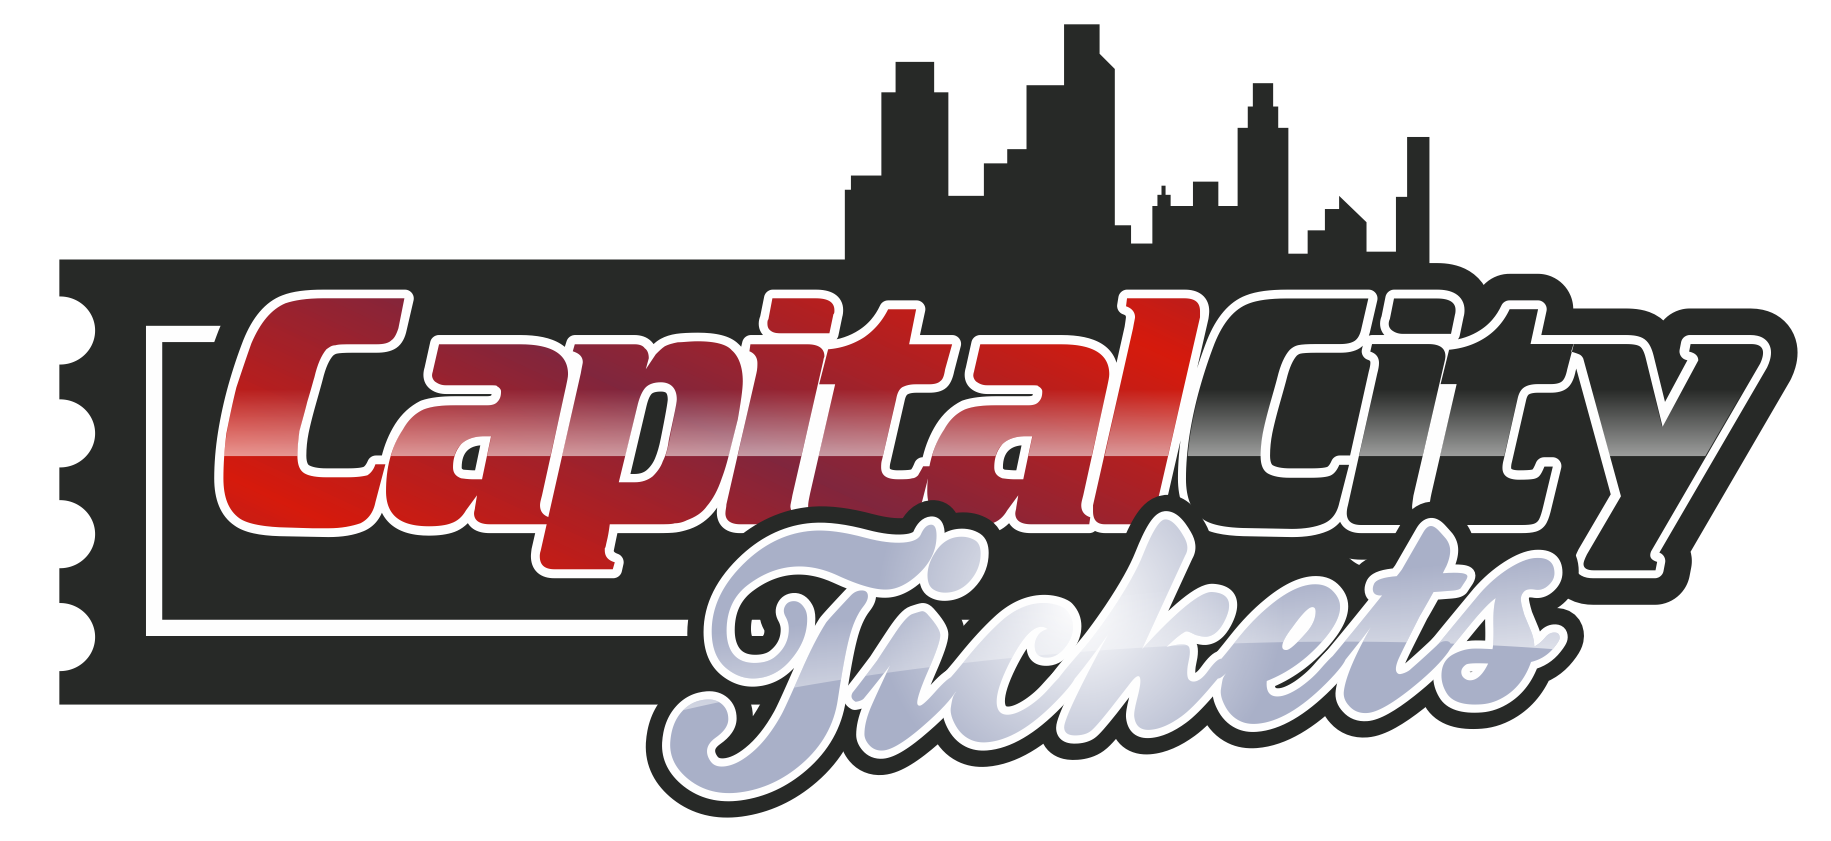 Discount USC Trojans Lower Level Tickets, Upper Level Seating, Club Seats, and Parking for their 2018 College Football Games at Capital City Tickets with Promo Code 1